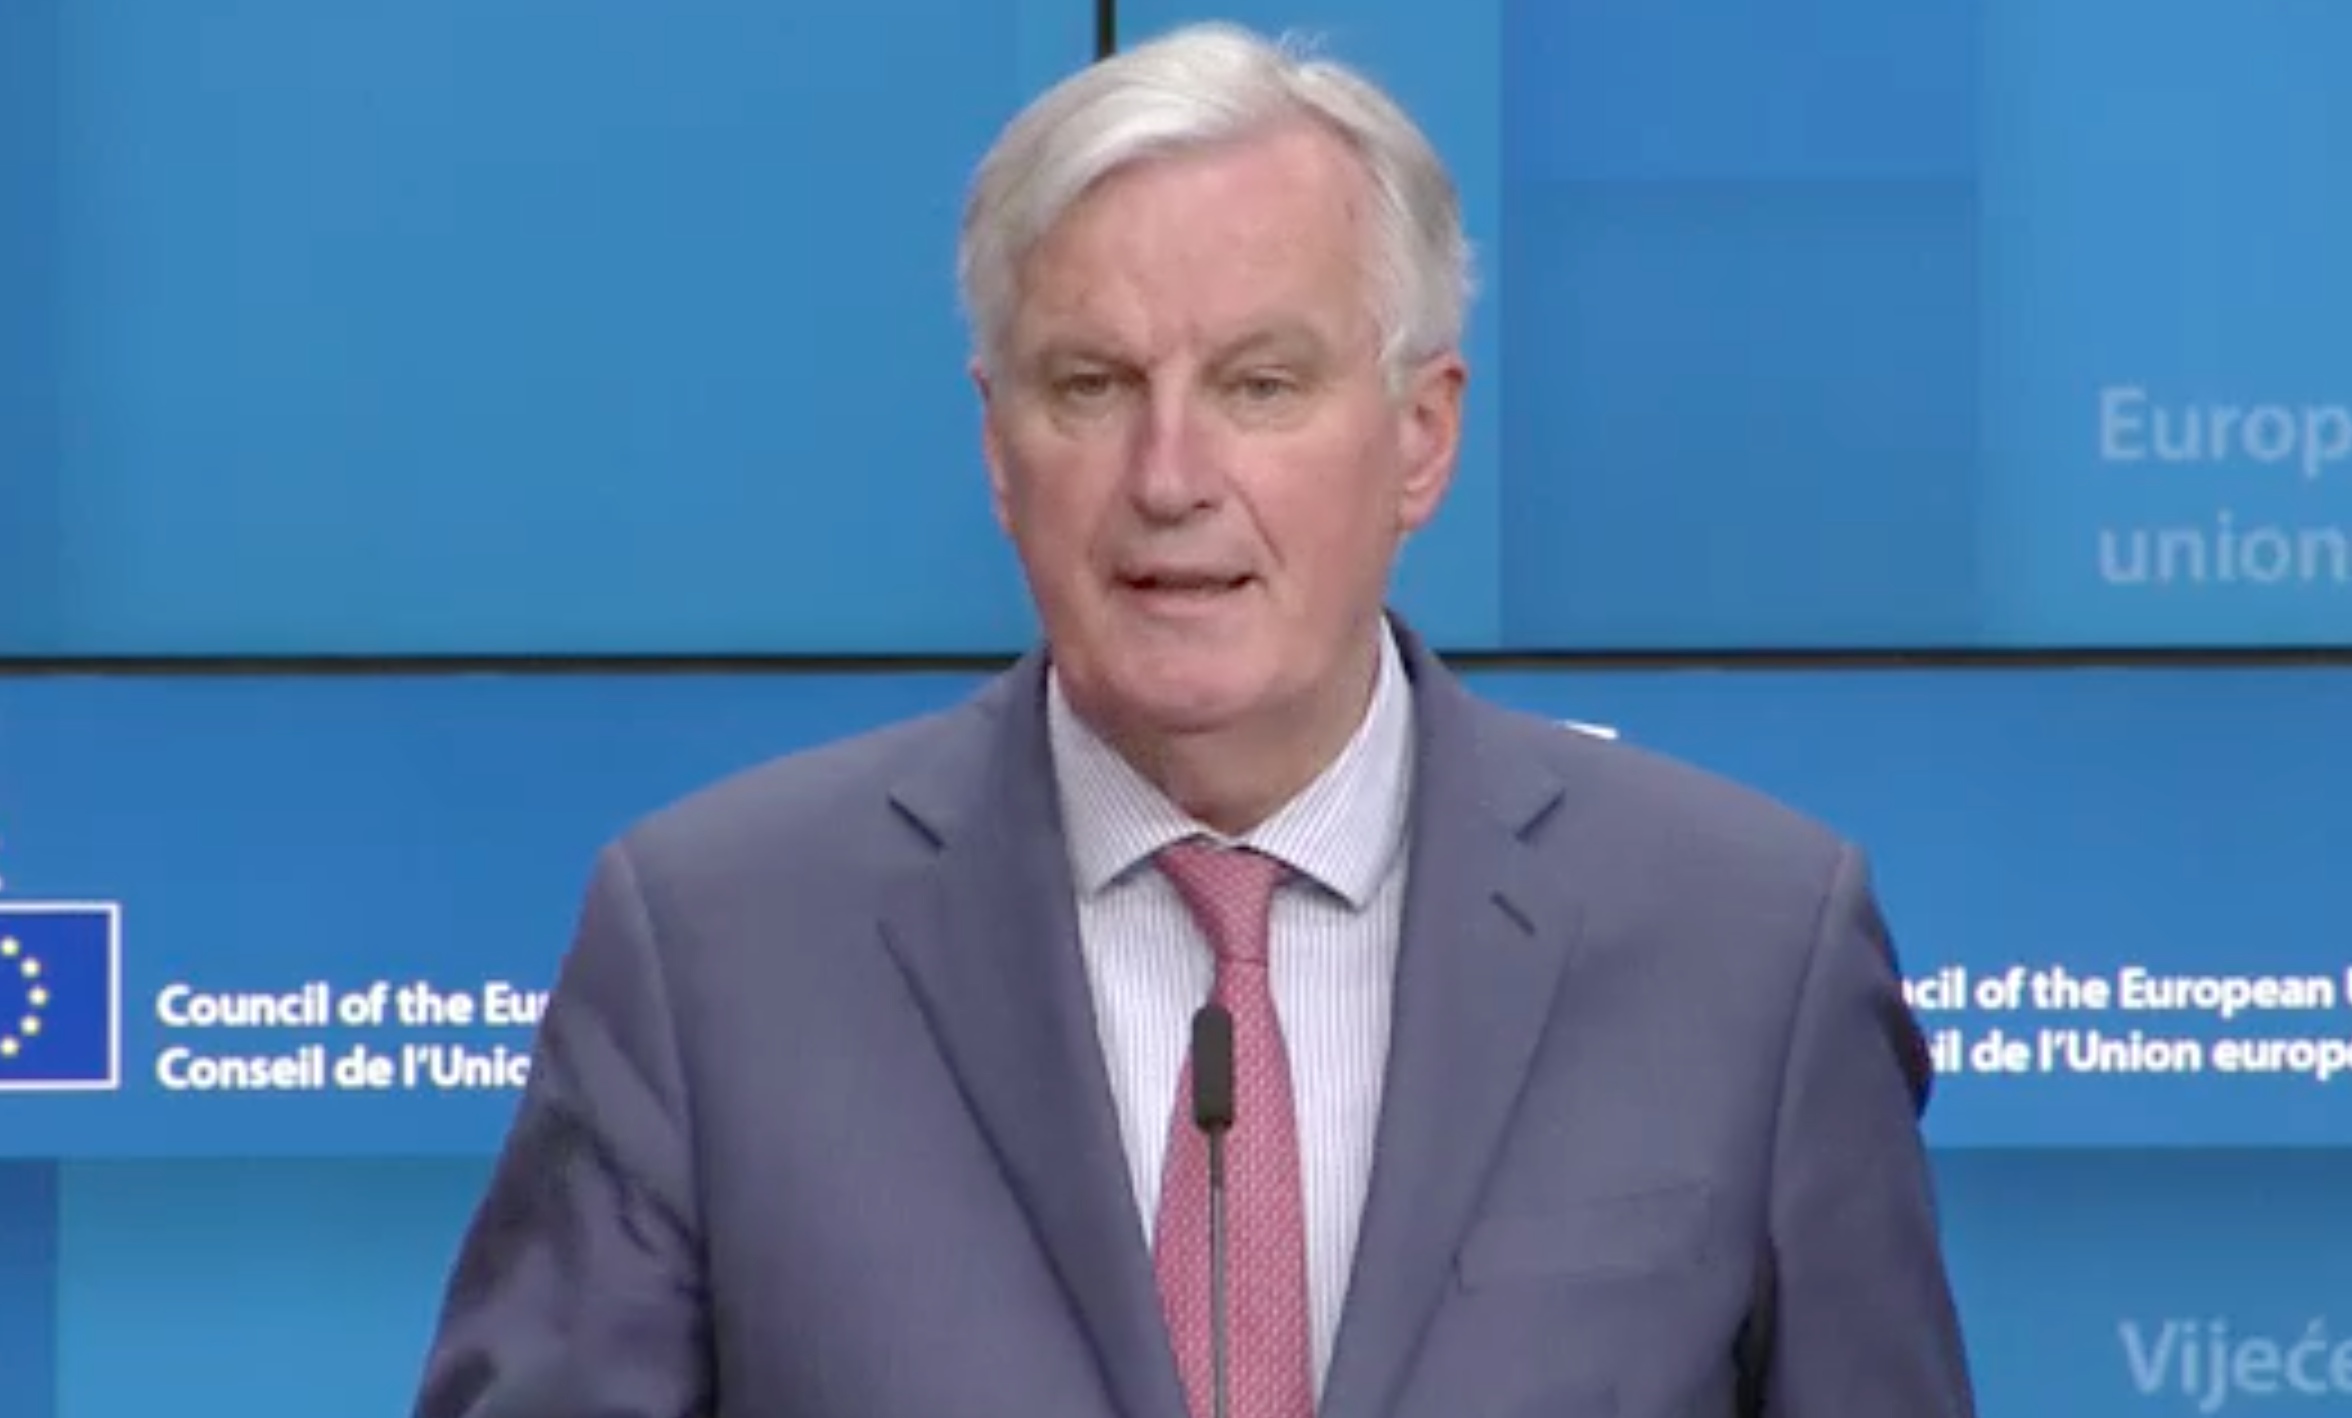 Michel Barnier speaking in Brussels after the meeting